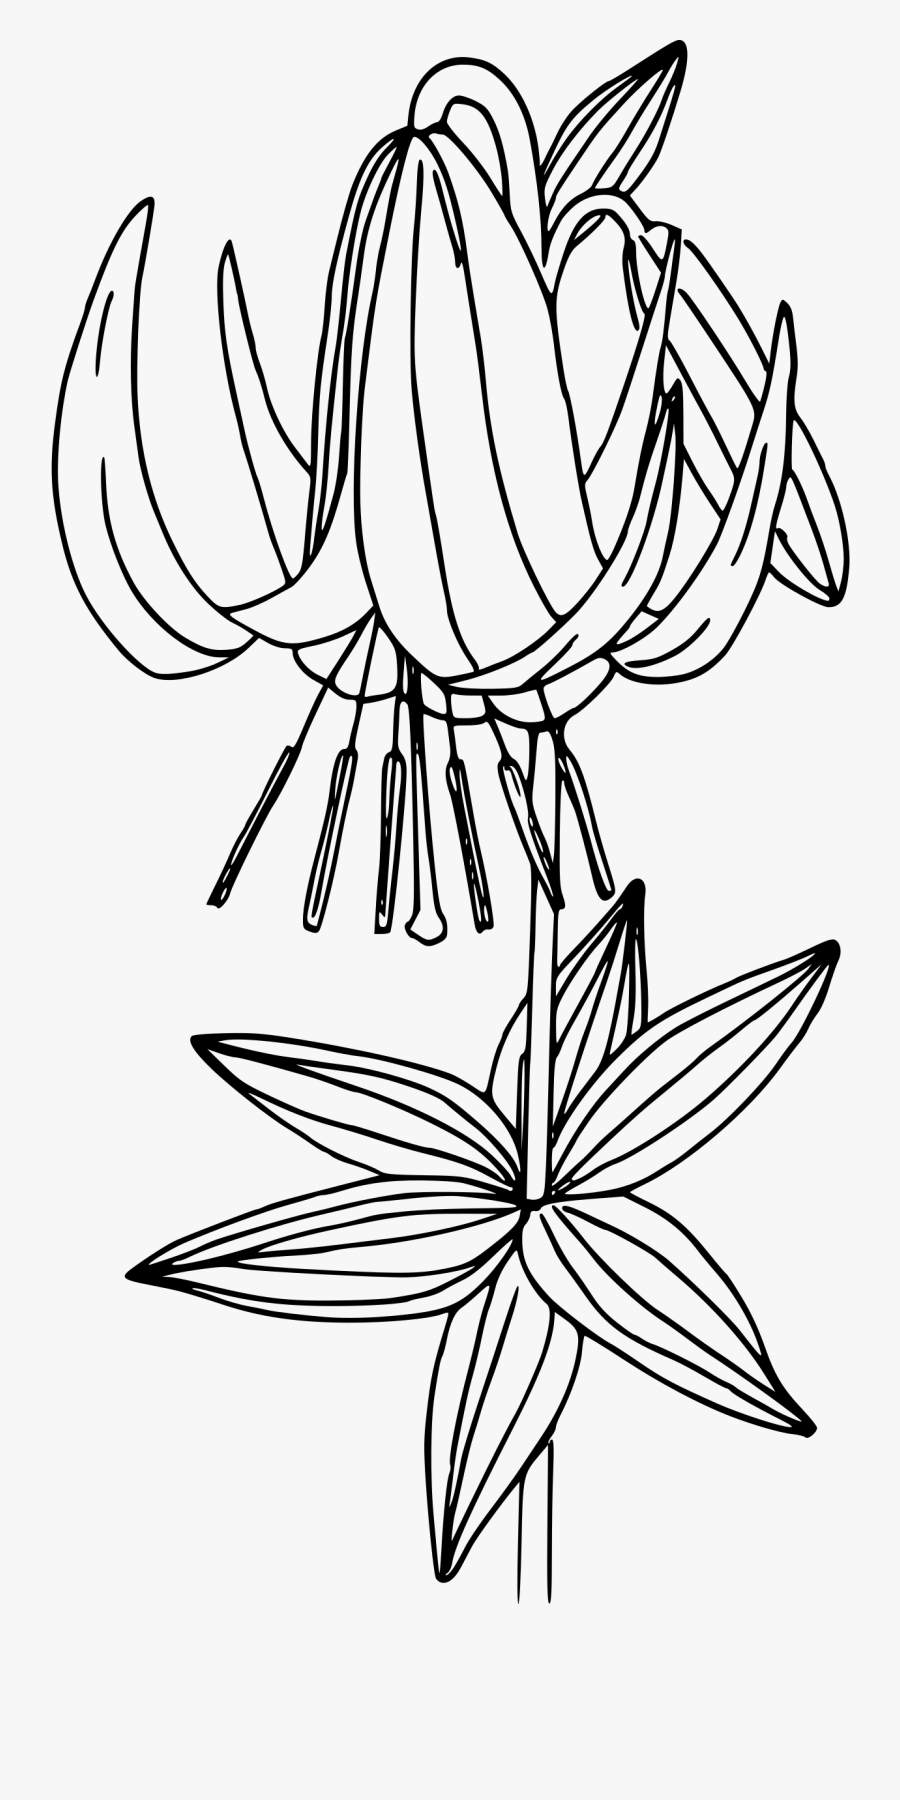 Western Lily Clip Arts - Western Lily Drawings, Transparent Clipart